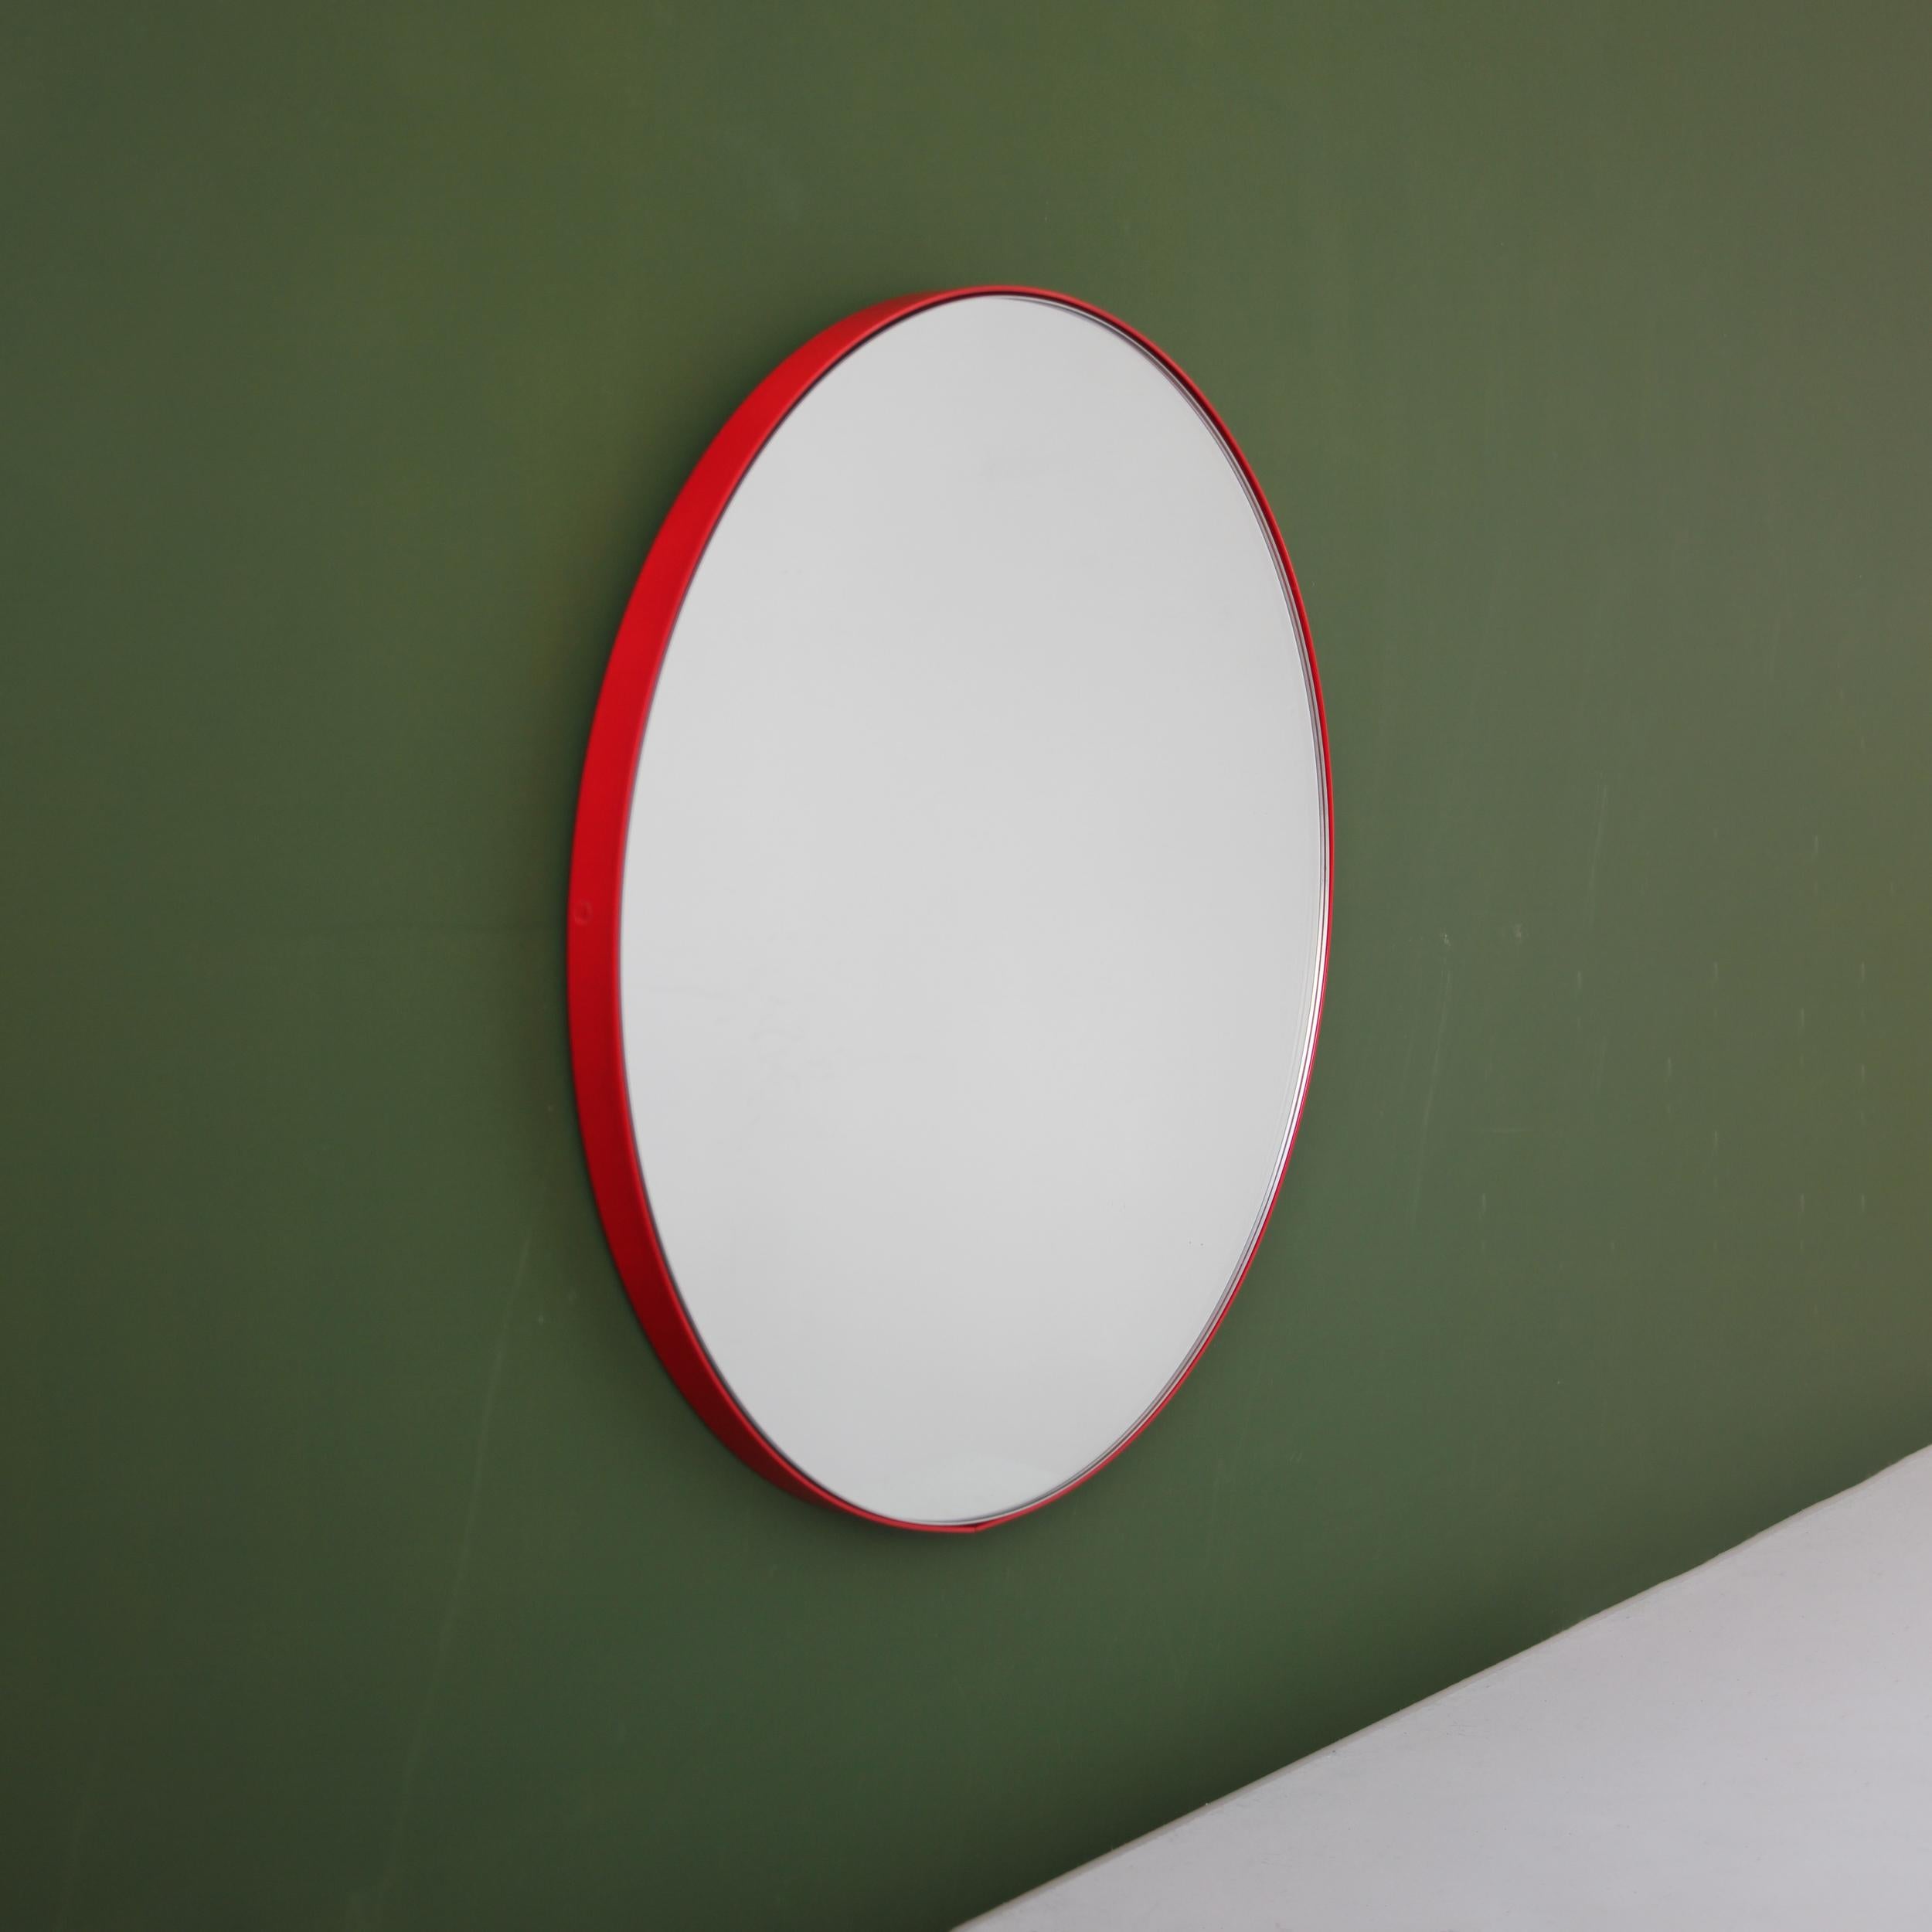 Powder-Coated Orbis Round Contemporary Handcrafted Mirror with Red Frame, Large For Sale